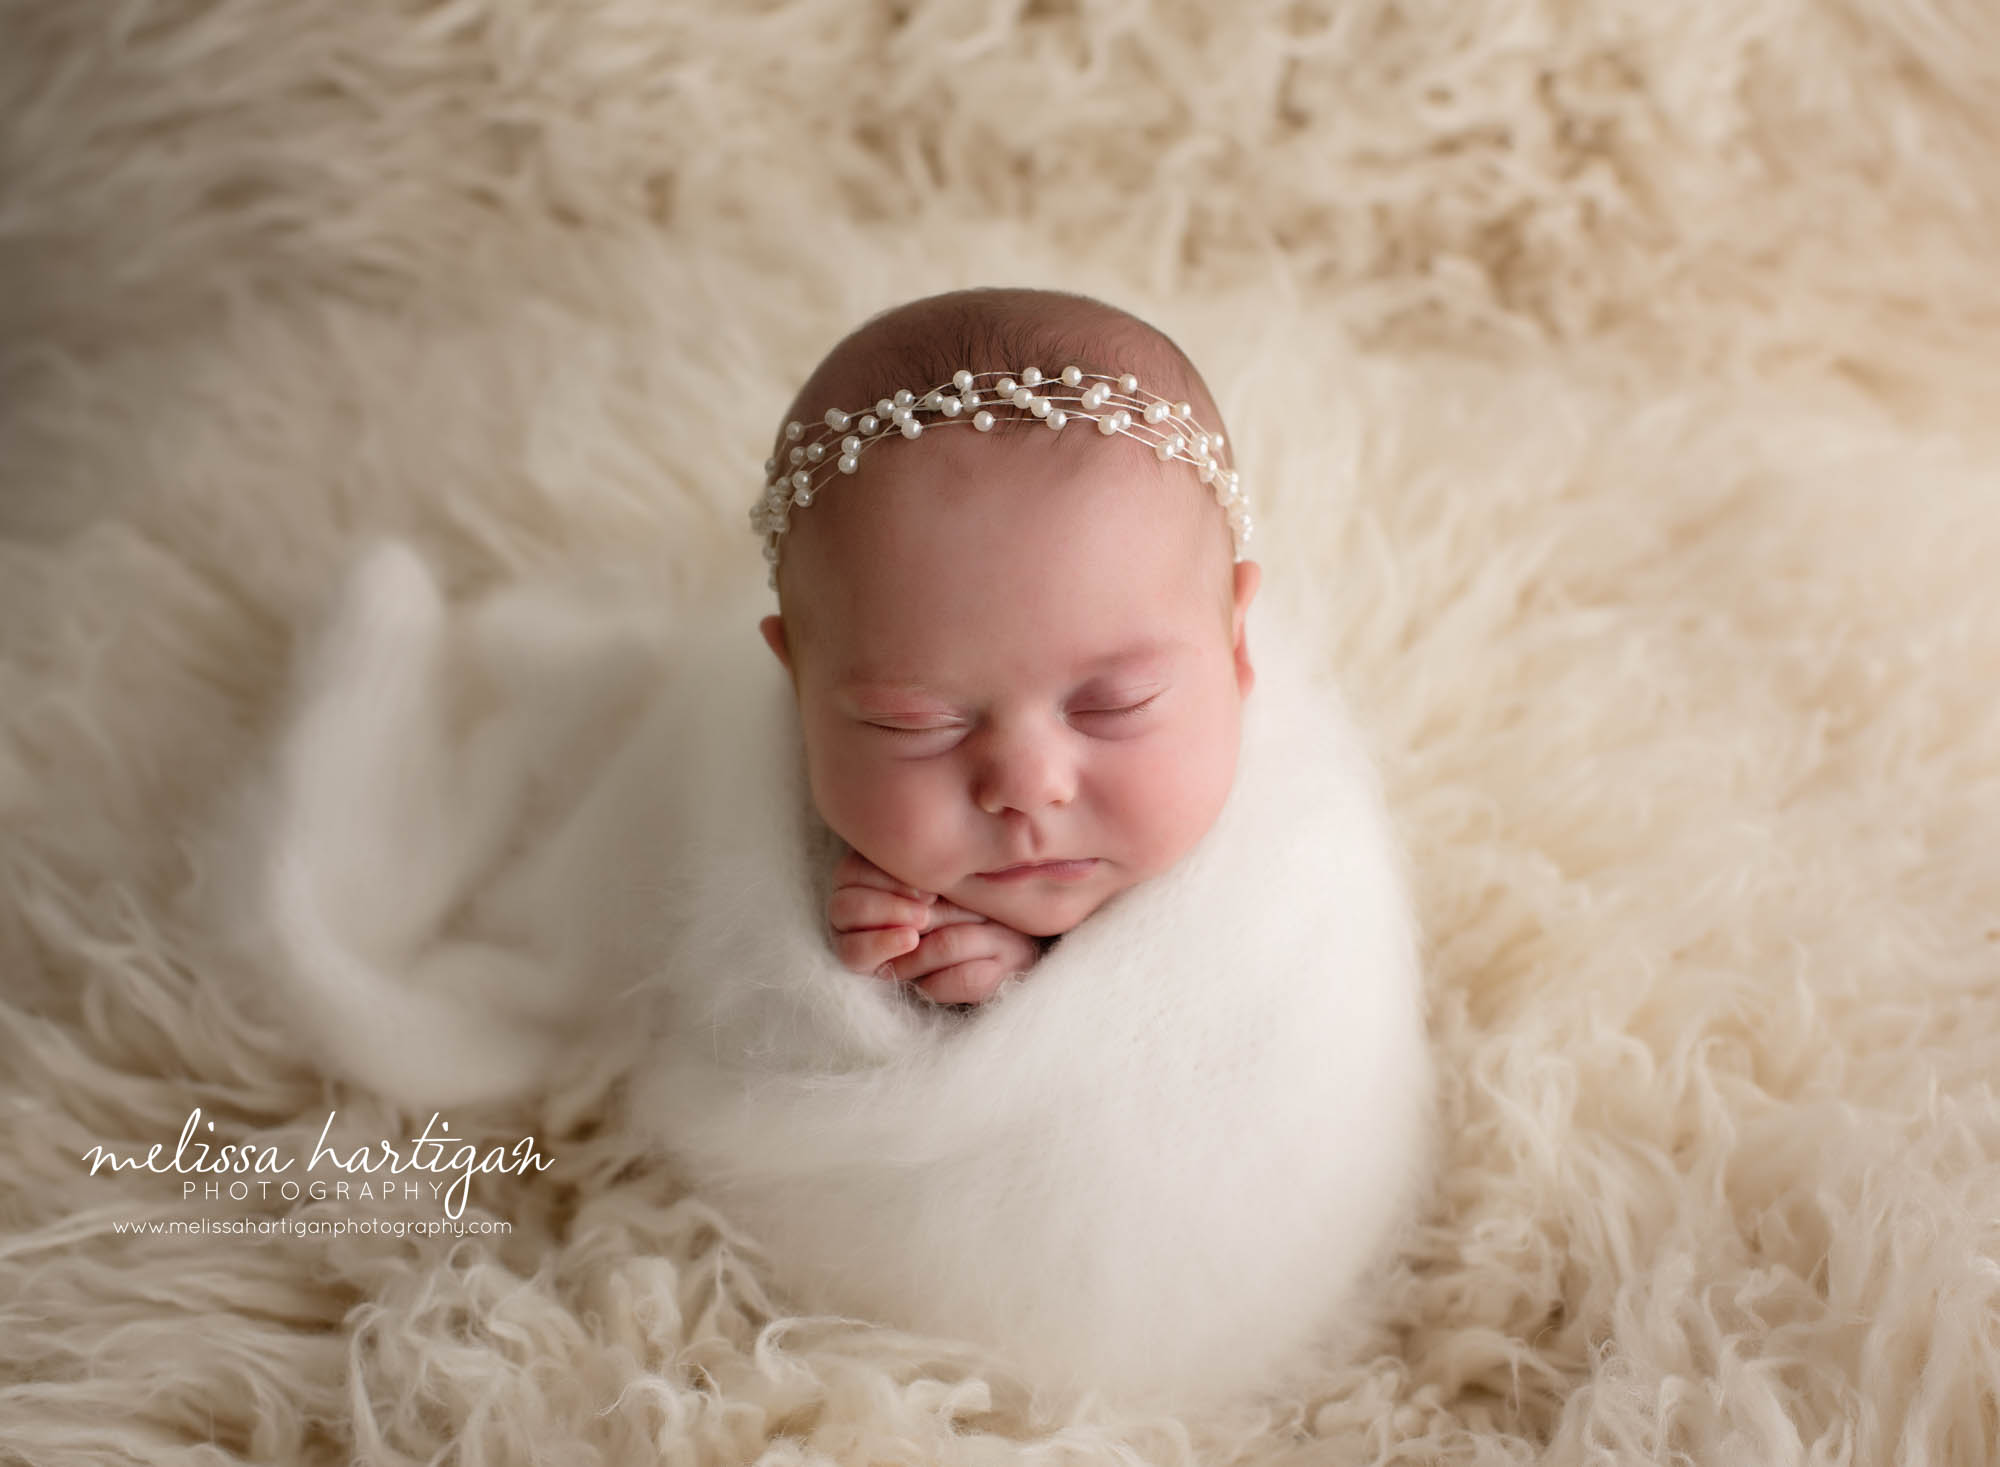 newborn baby girl wrapped and posed on cream flokati